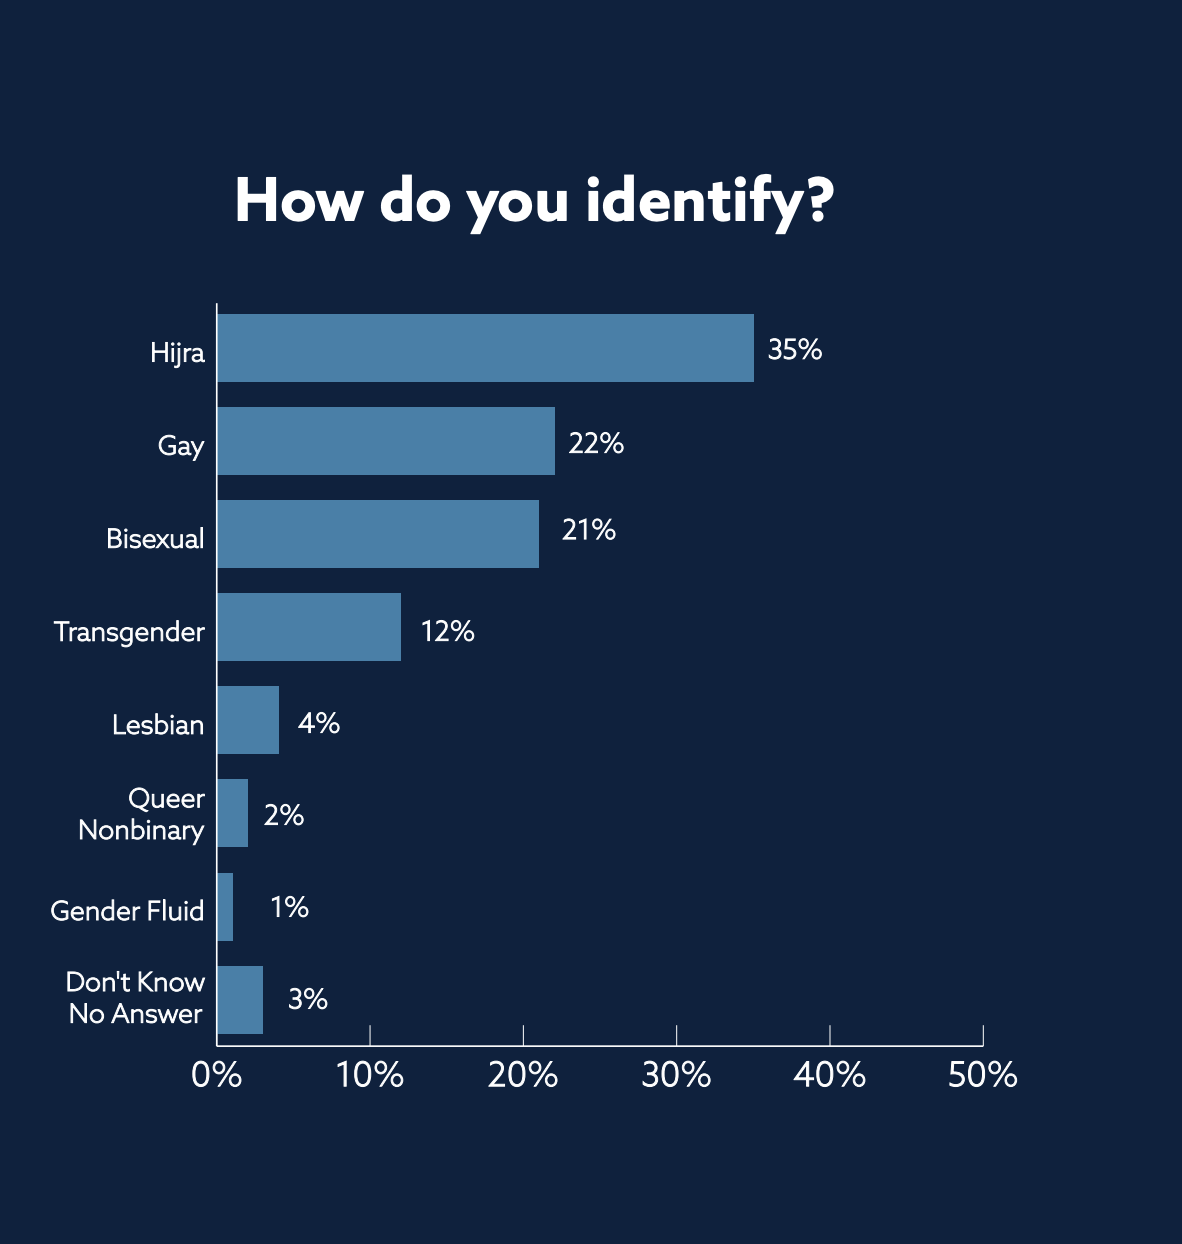 How do you identify?  A bar chart showing: Hijra 35%; Gay 22%; Bisexual 21%; Transgender 12%; Lesbian 4%; Queer/Nonbinary 2%; Gender-fluid 1%; Don't Know/No Answer 3%